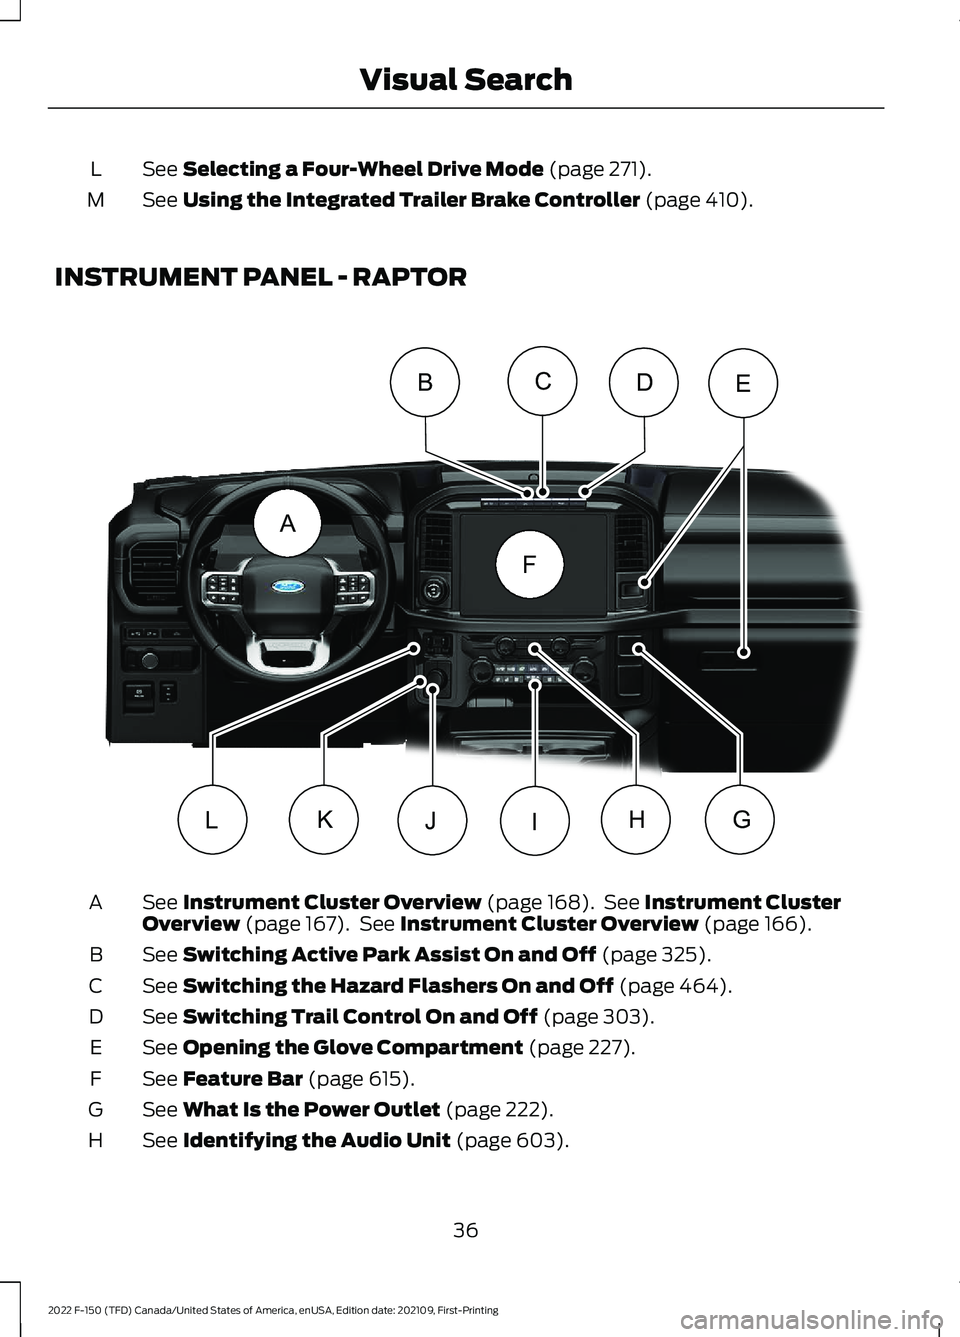 FORD F-150 2022  Owners Manual See Selecting a Four-Wheel Drive Mode (page 271).
L
See 
Using the Integrated Trailer Brake Controller (page 410).
M
INSTRUMENT PANEL - RAPTOR See 
Instrument Cluster Overview (page 168).  See Instrum